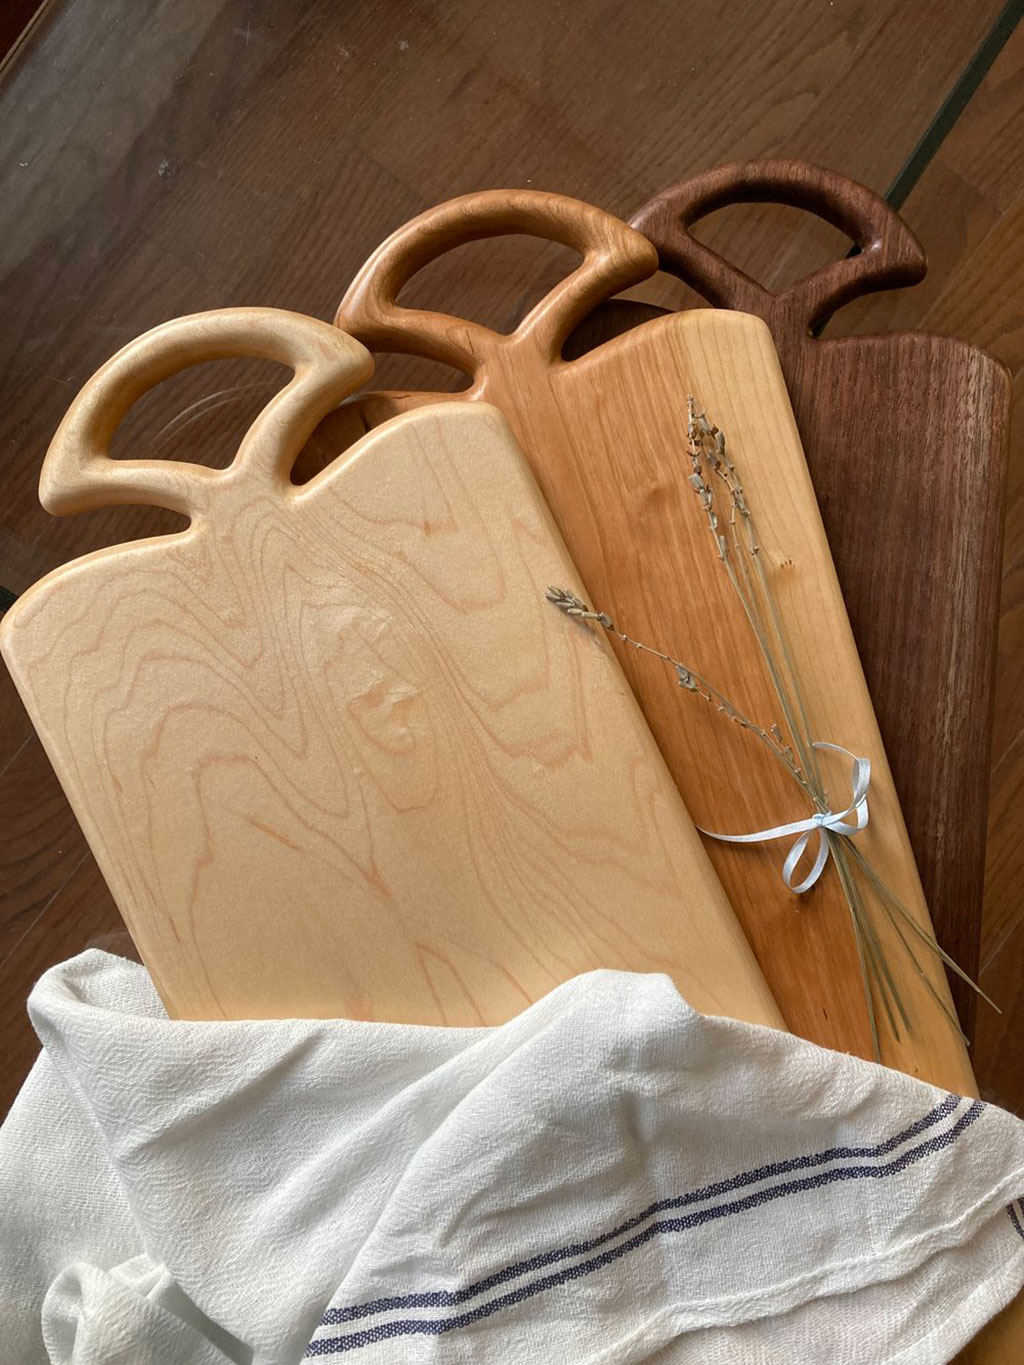 Arched Cutting Boards